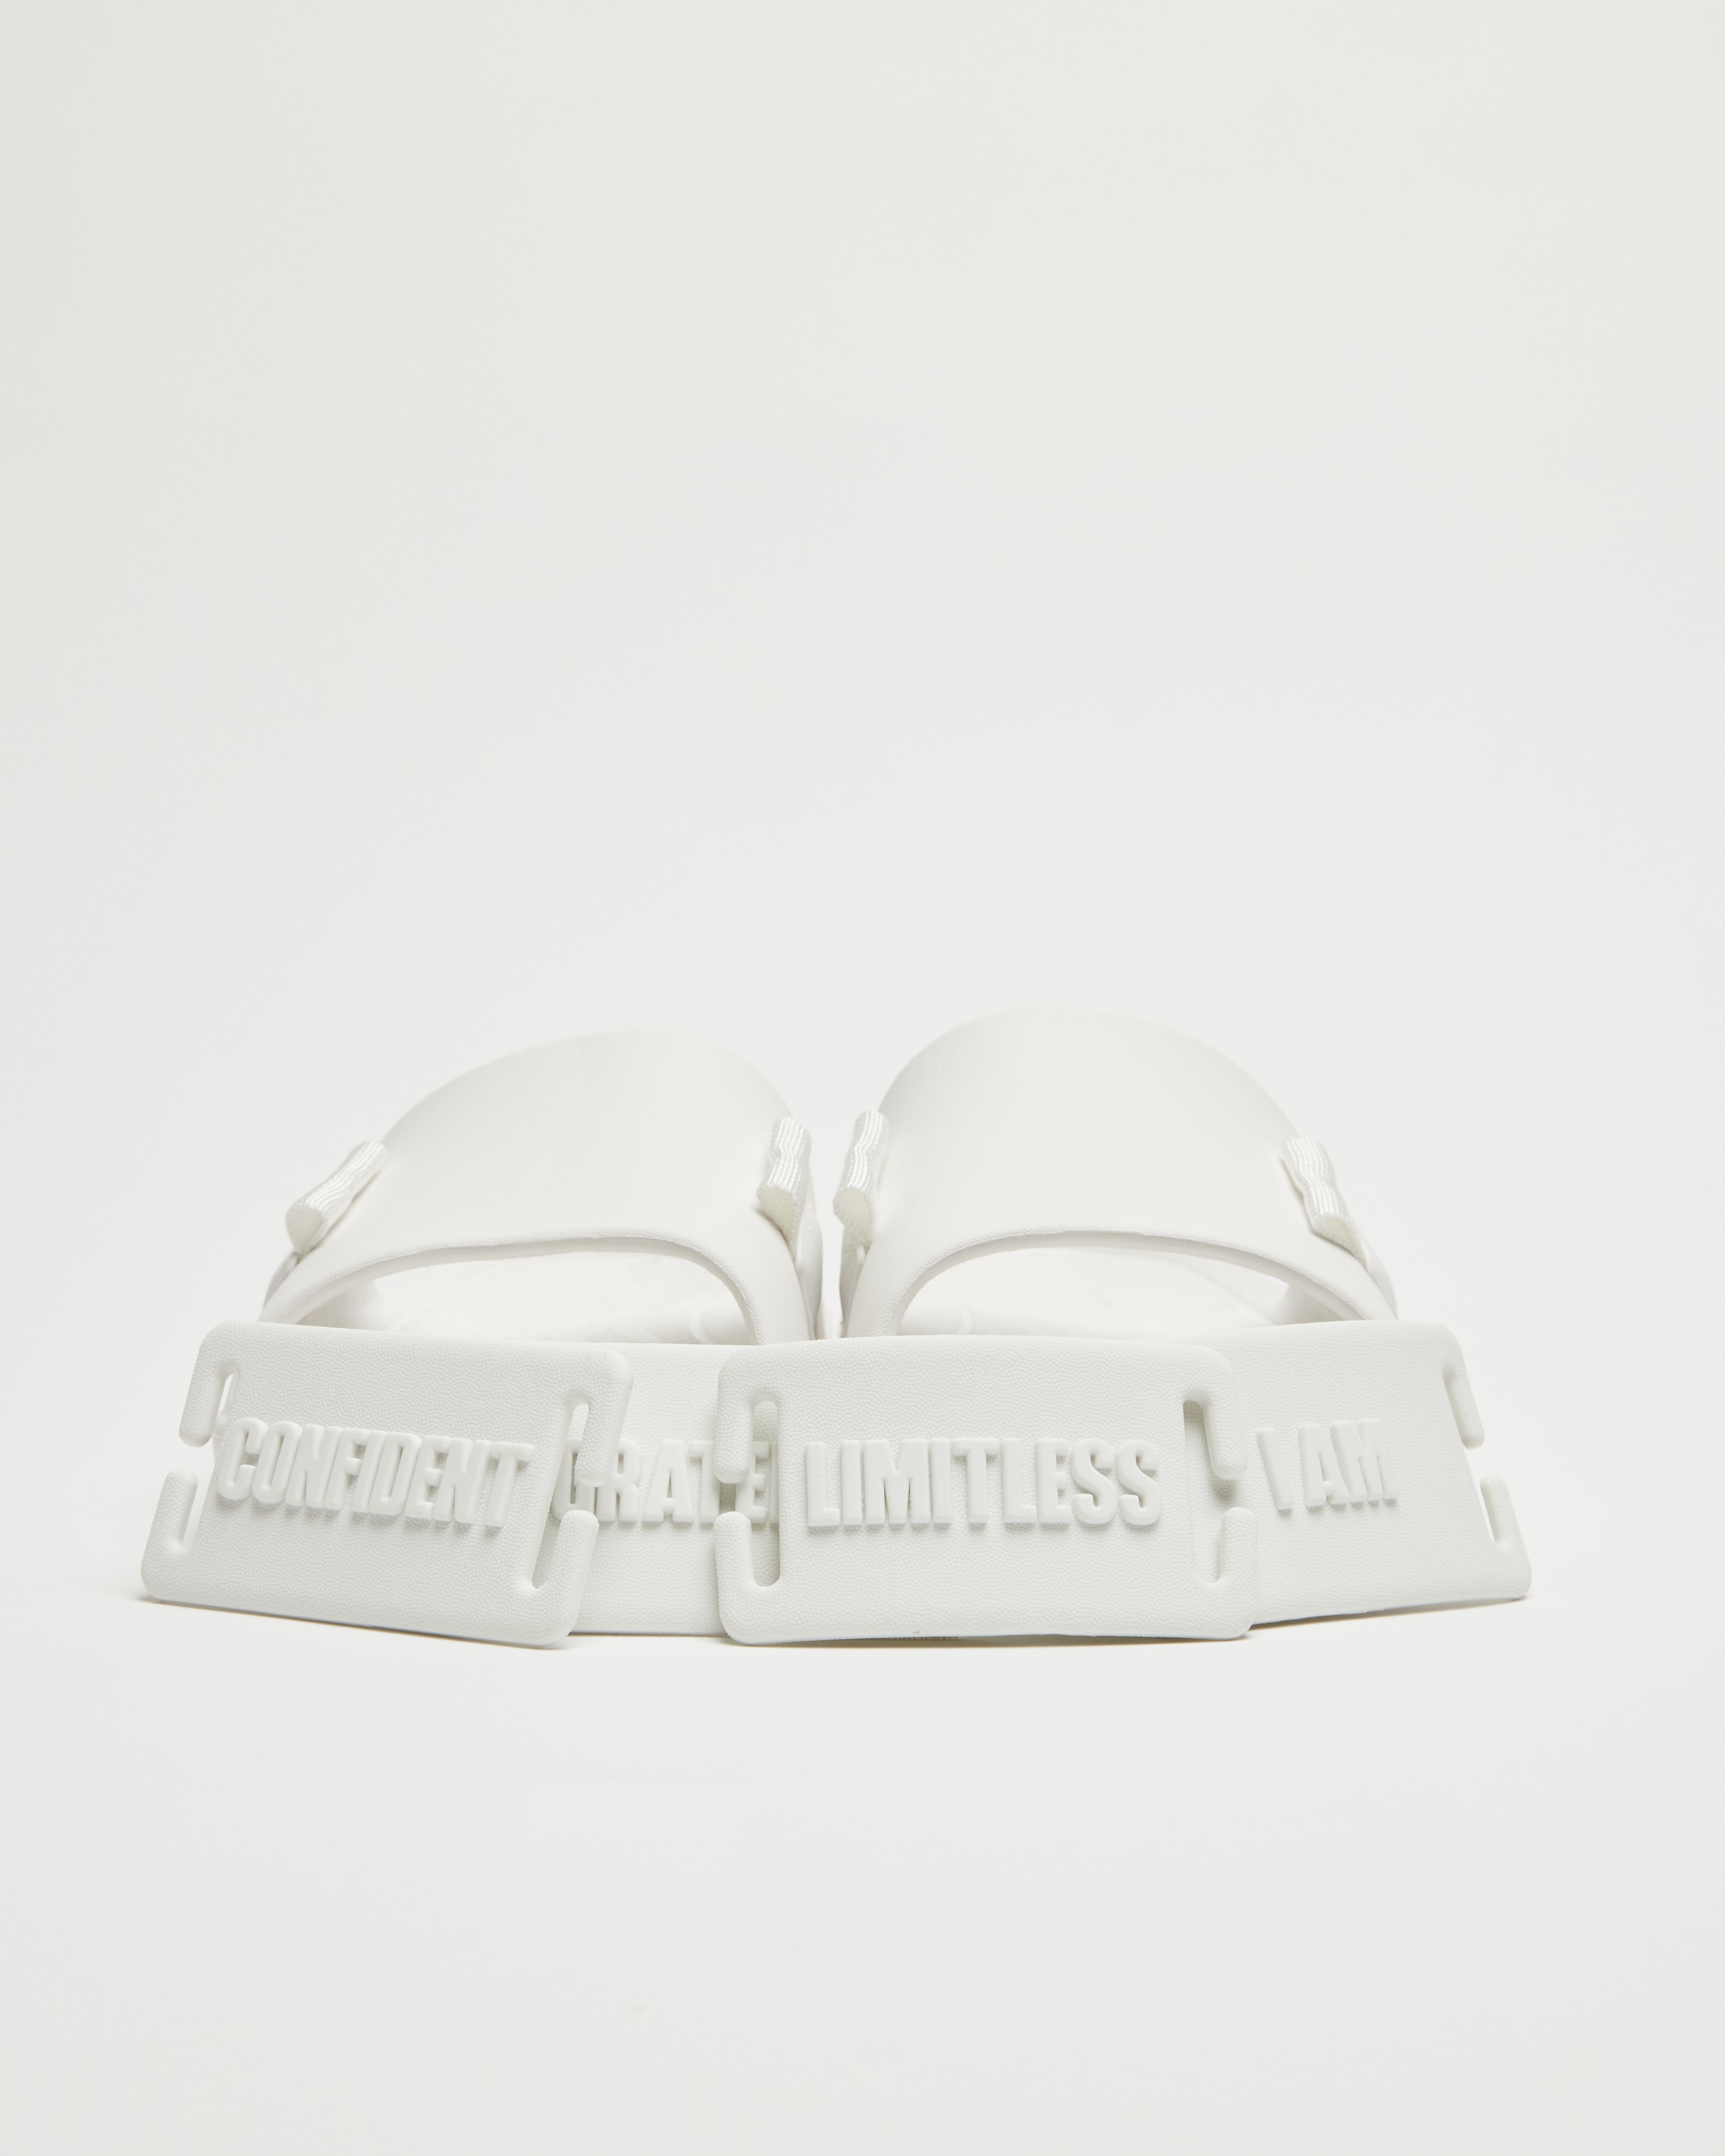 LIMITLESS SLIDES™ WITH ESSENTIAL TIBAH™ QUAD - ABOVE THE BARRE DANCE COMPANY EDITION